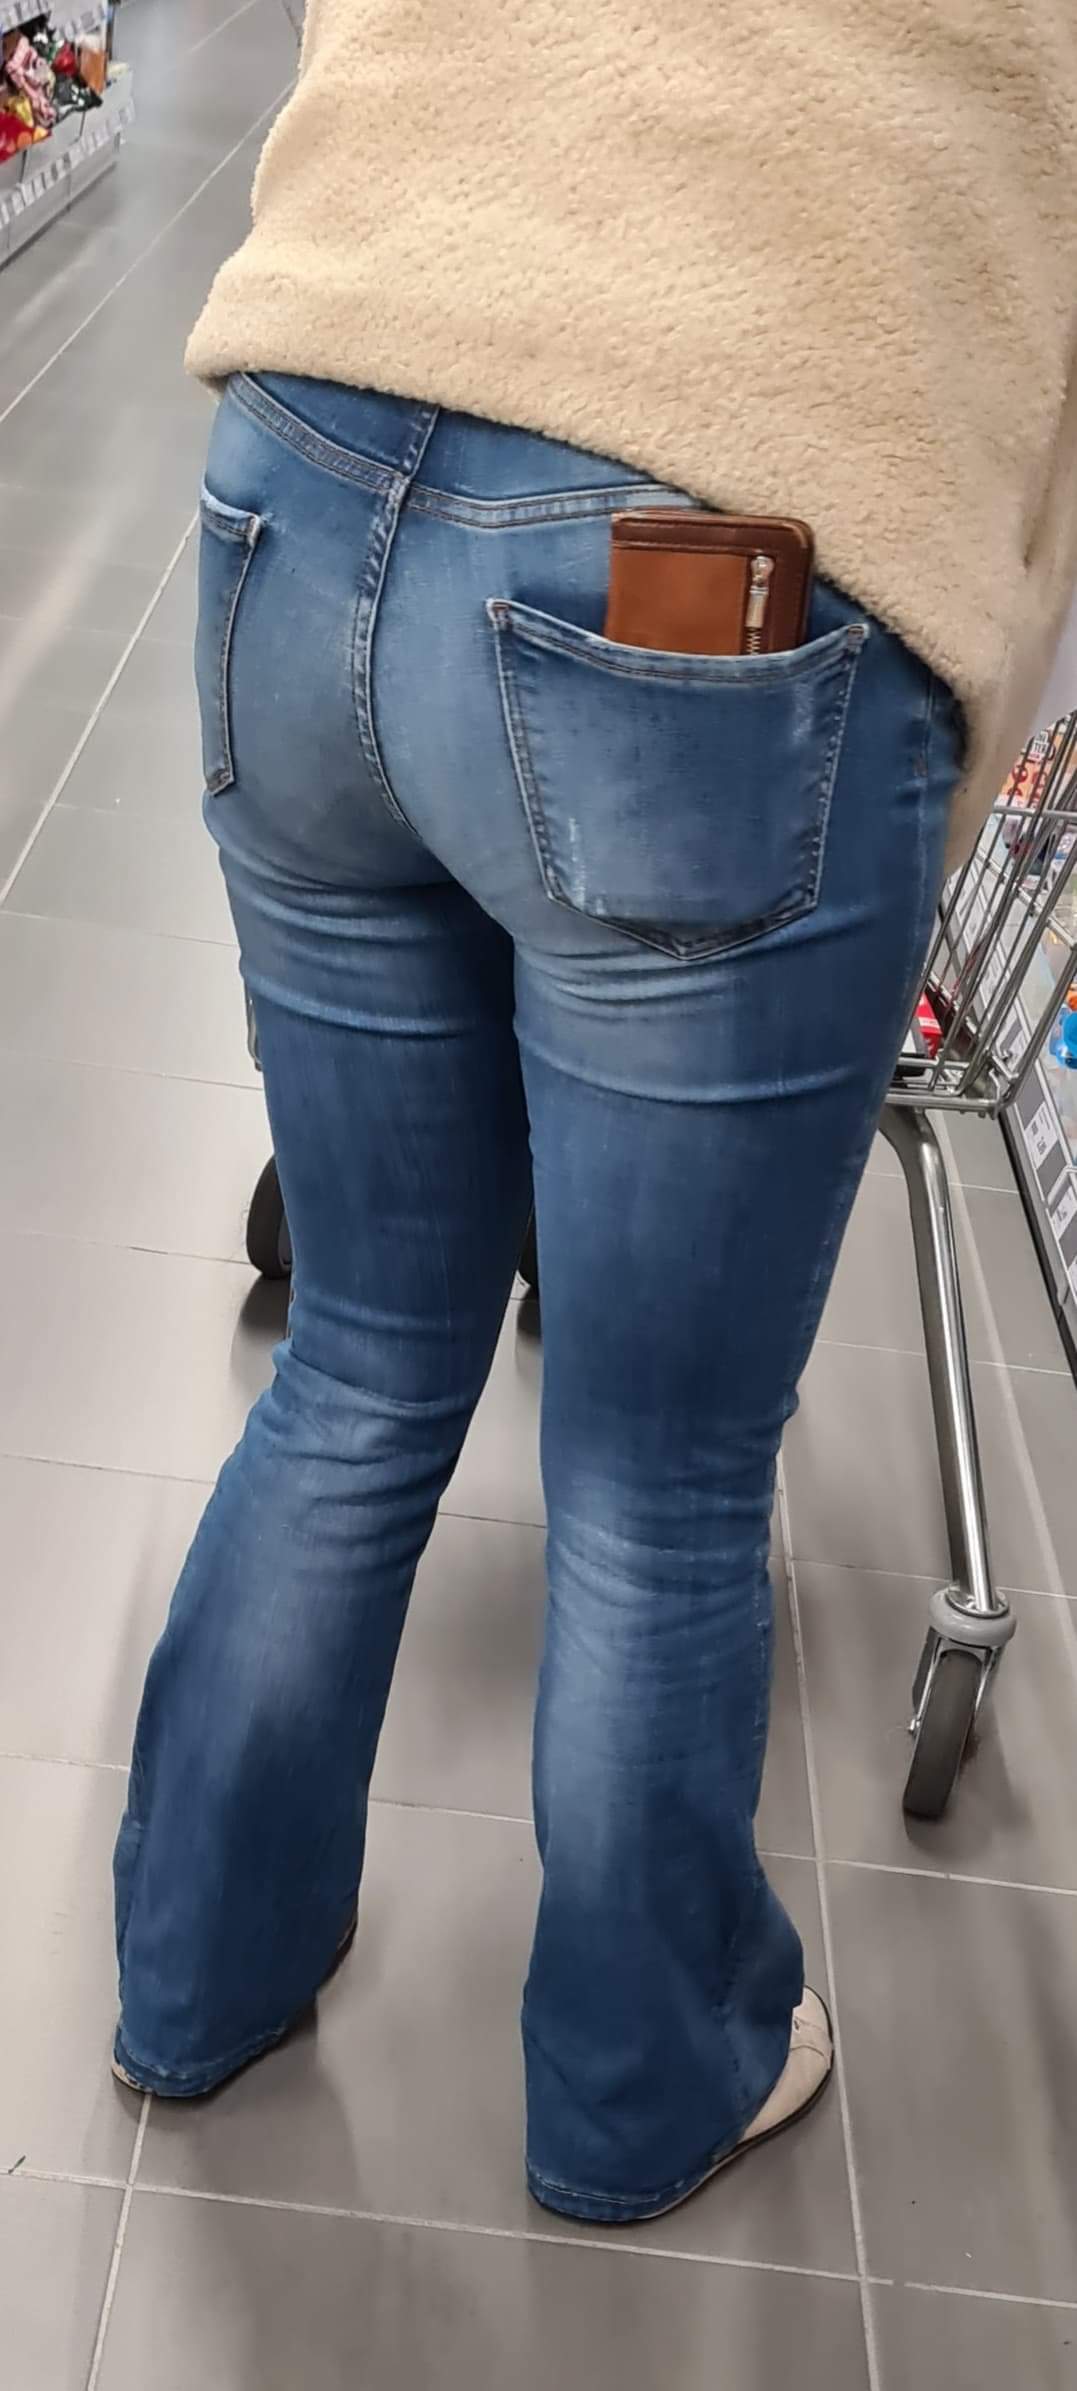 Tight jeans bending over - Tight Jeans - Forum